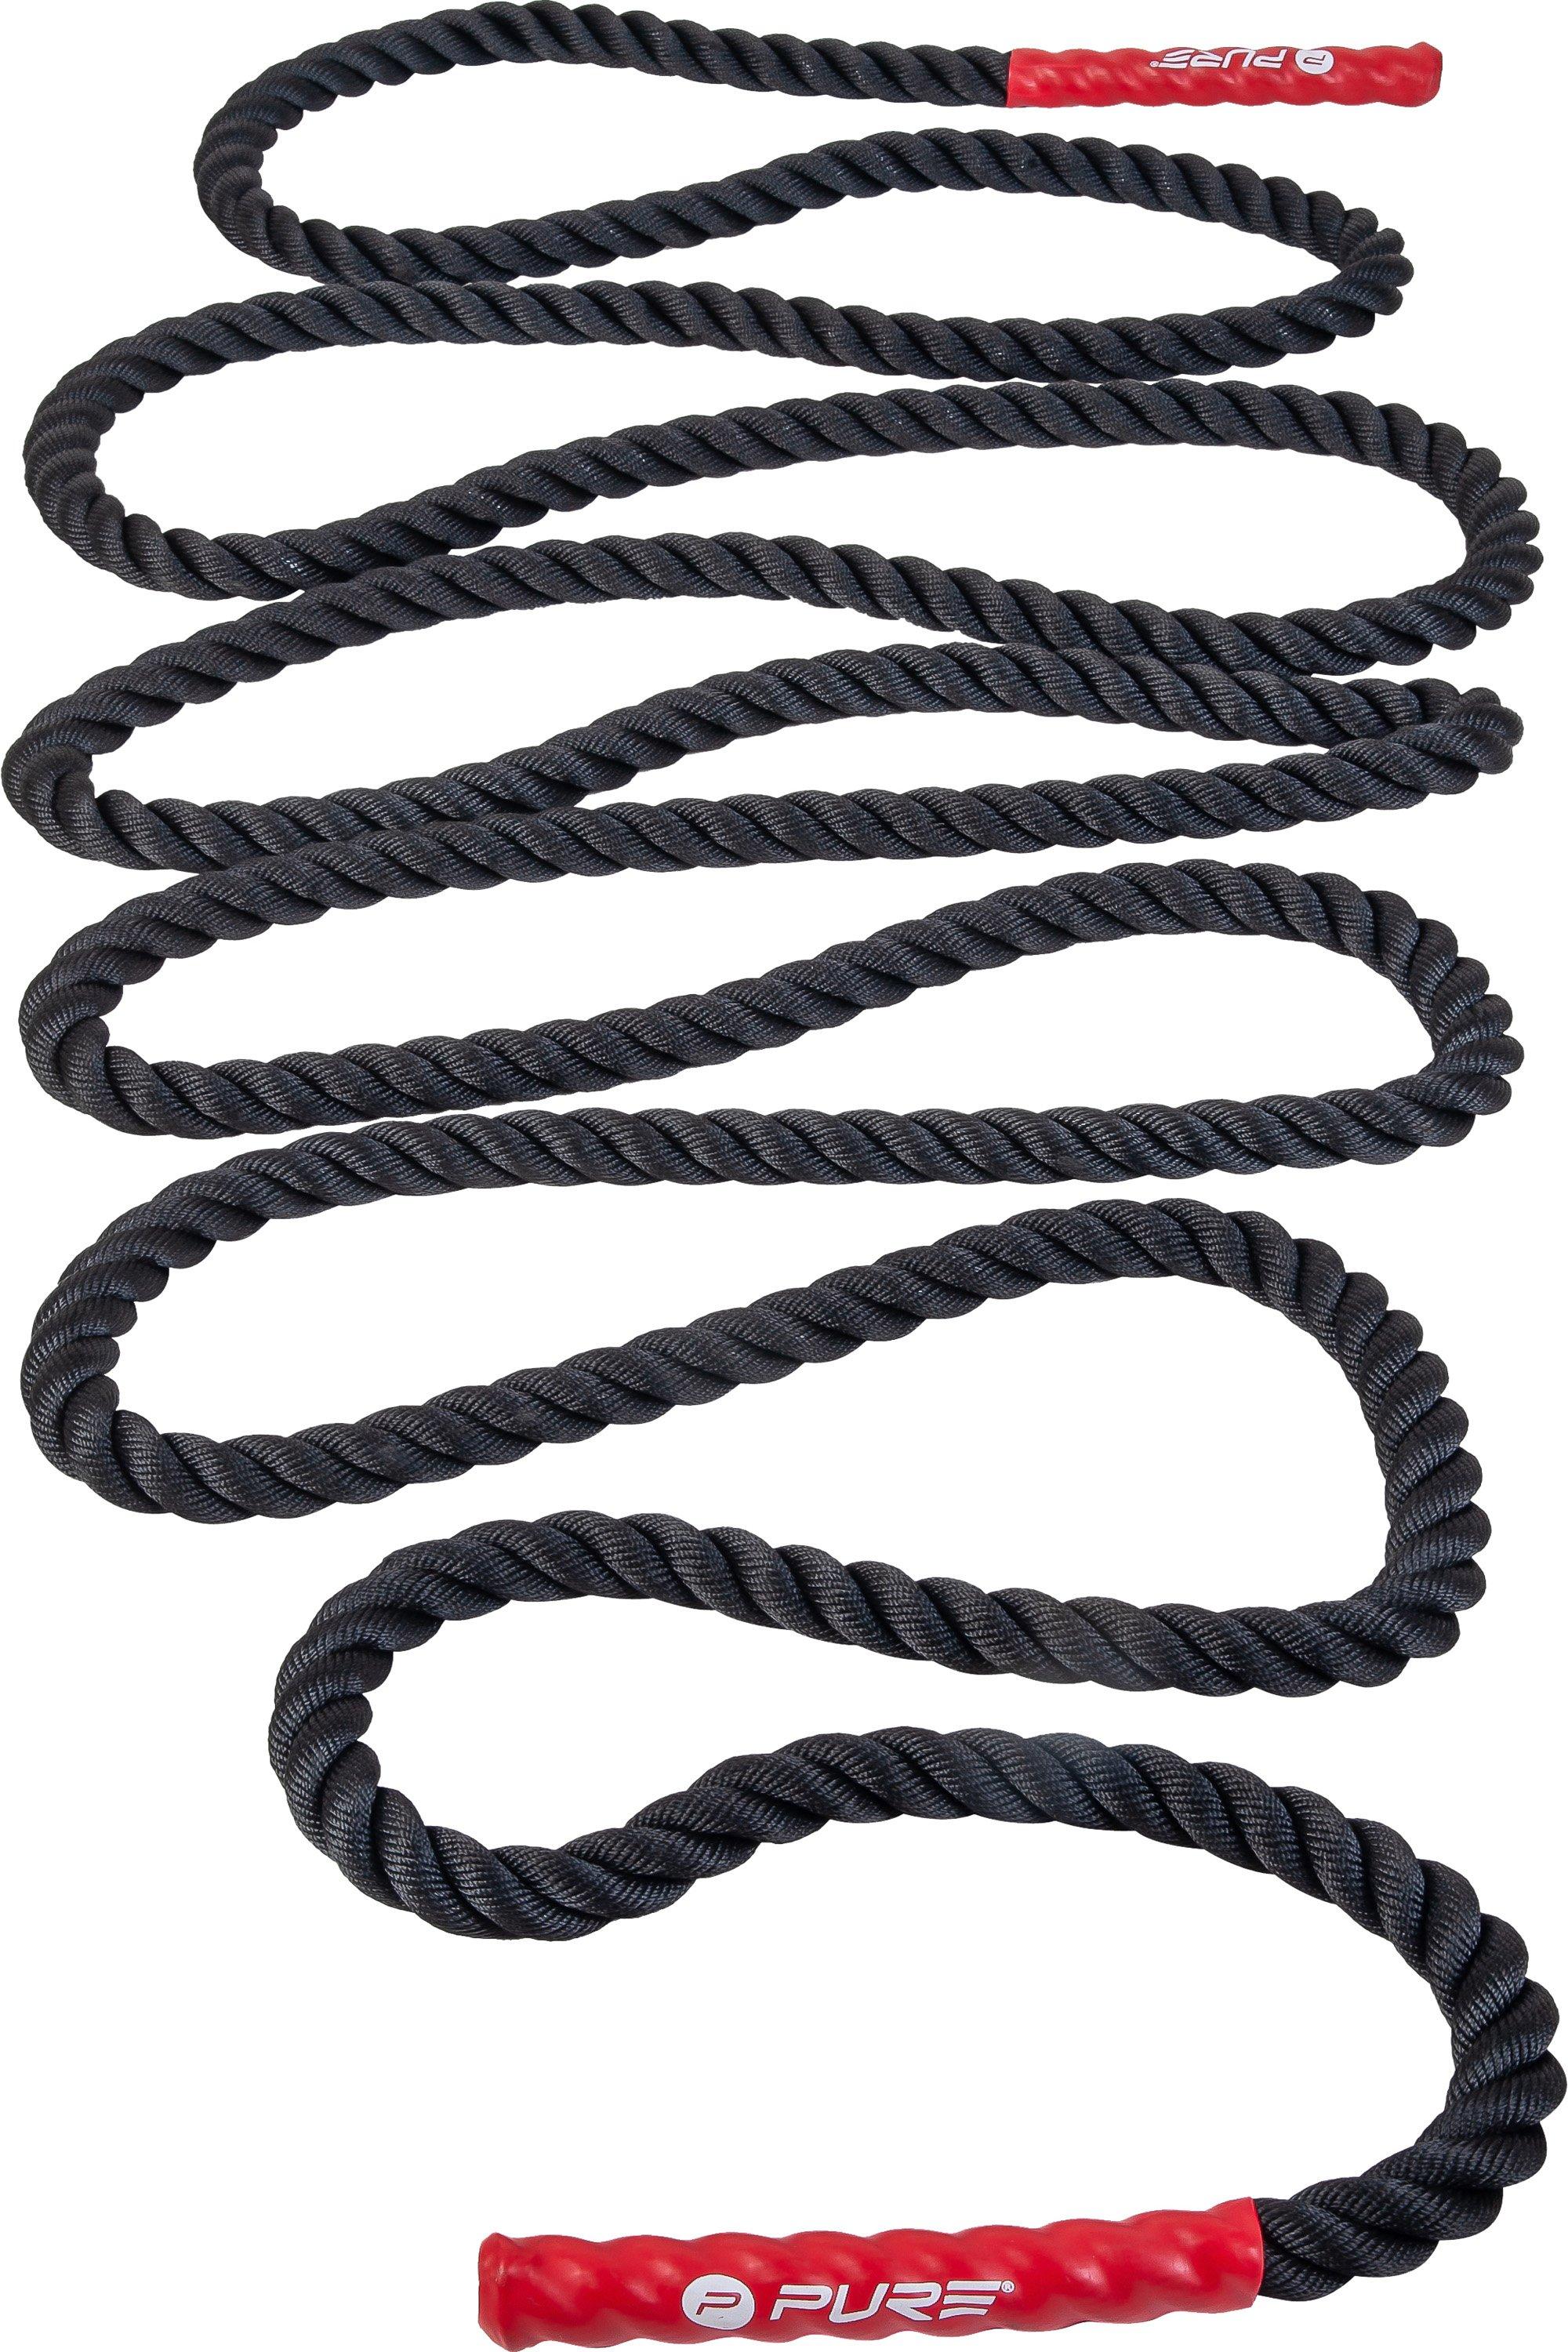 Pure2Improve Full Body Workout Battle Rope|